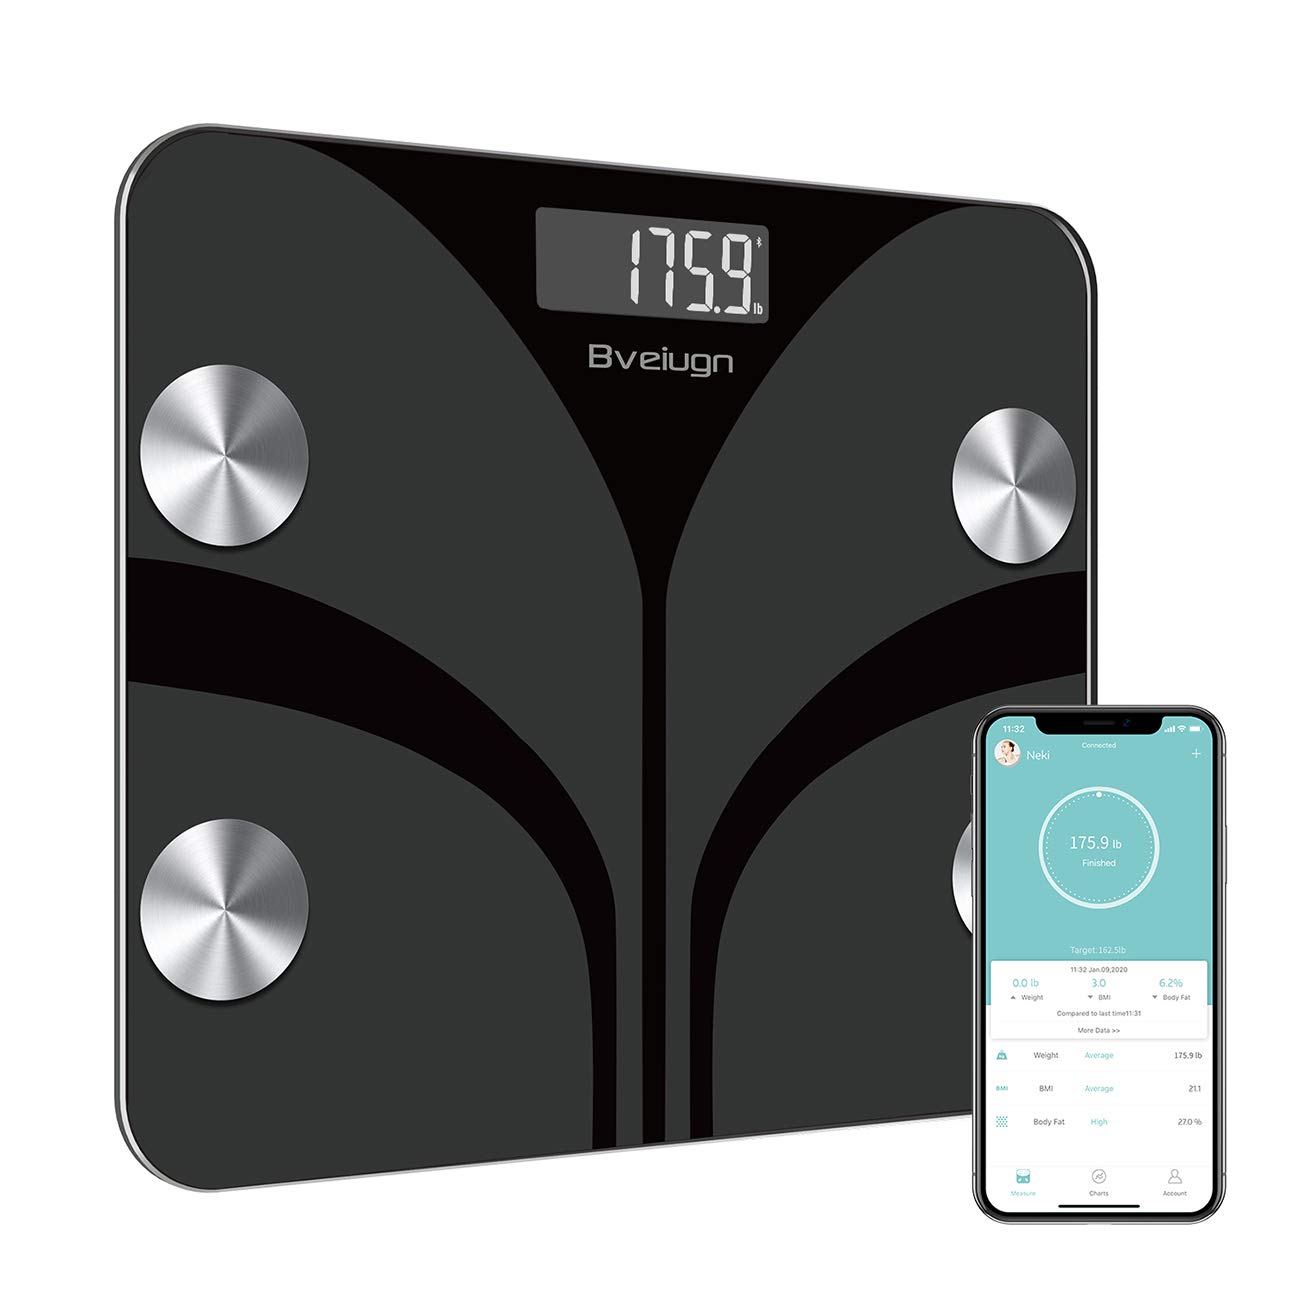 HNESS Body Fat Scale, Smart Wireless Digital Bathroom BMI Weight Scale, Body Composition Analyzer Health Monitor with Tempered Glass Platform Large Digital Backlit LCD with Smartphone App